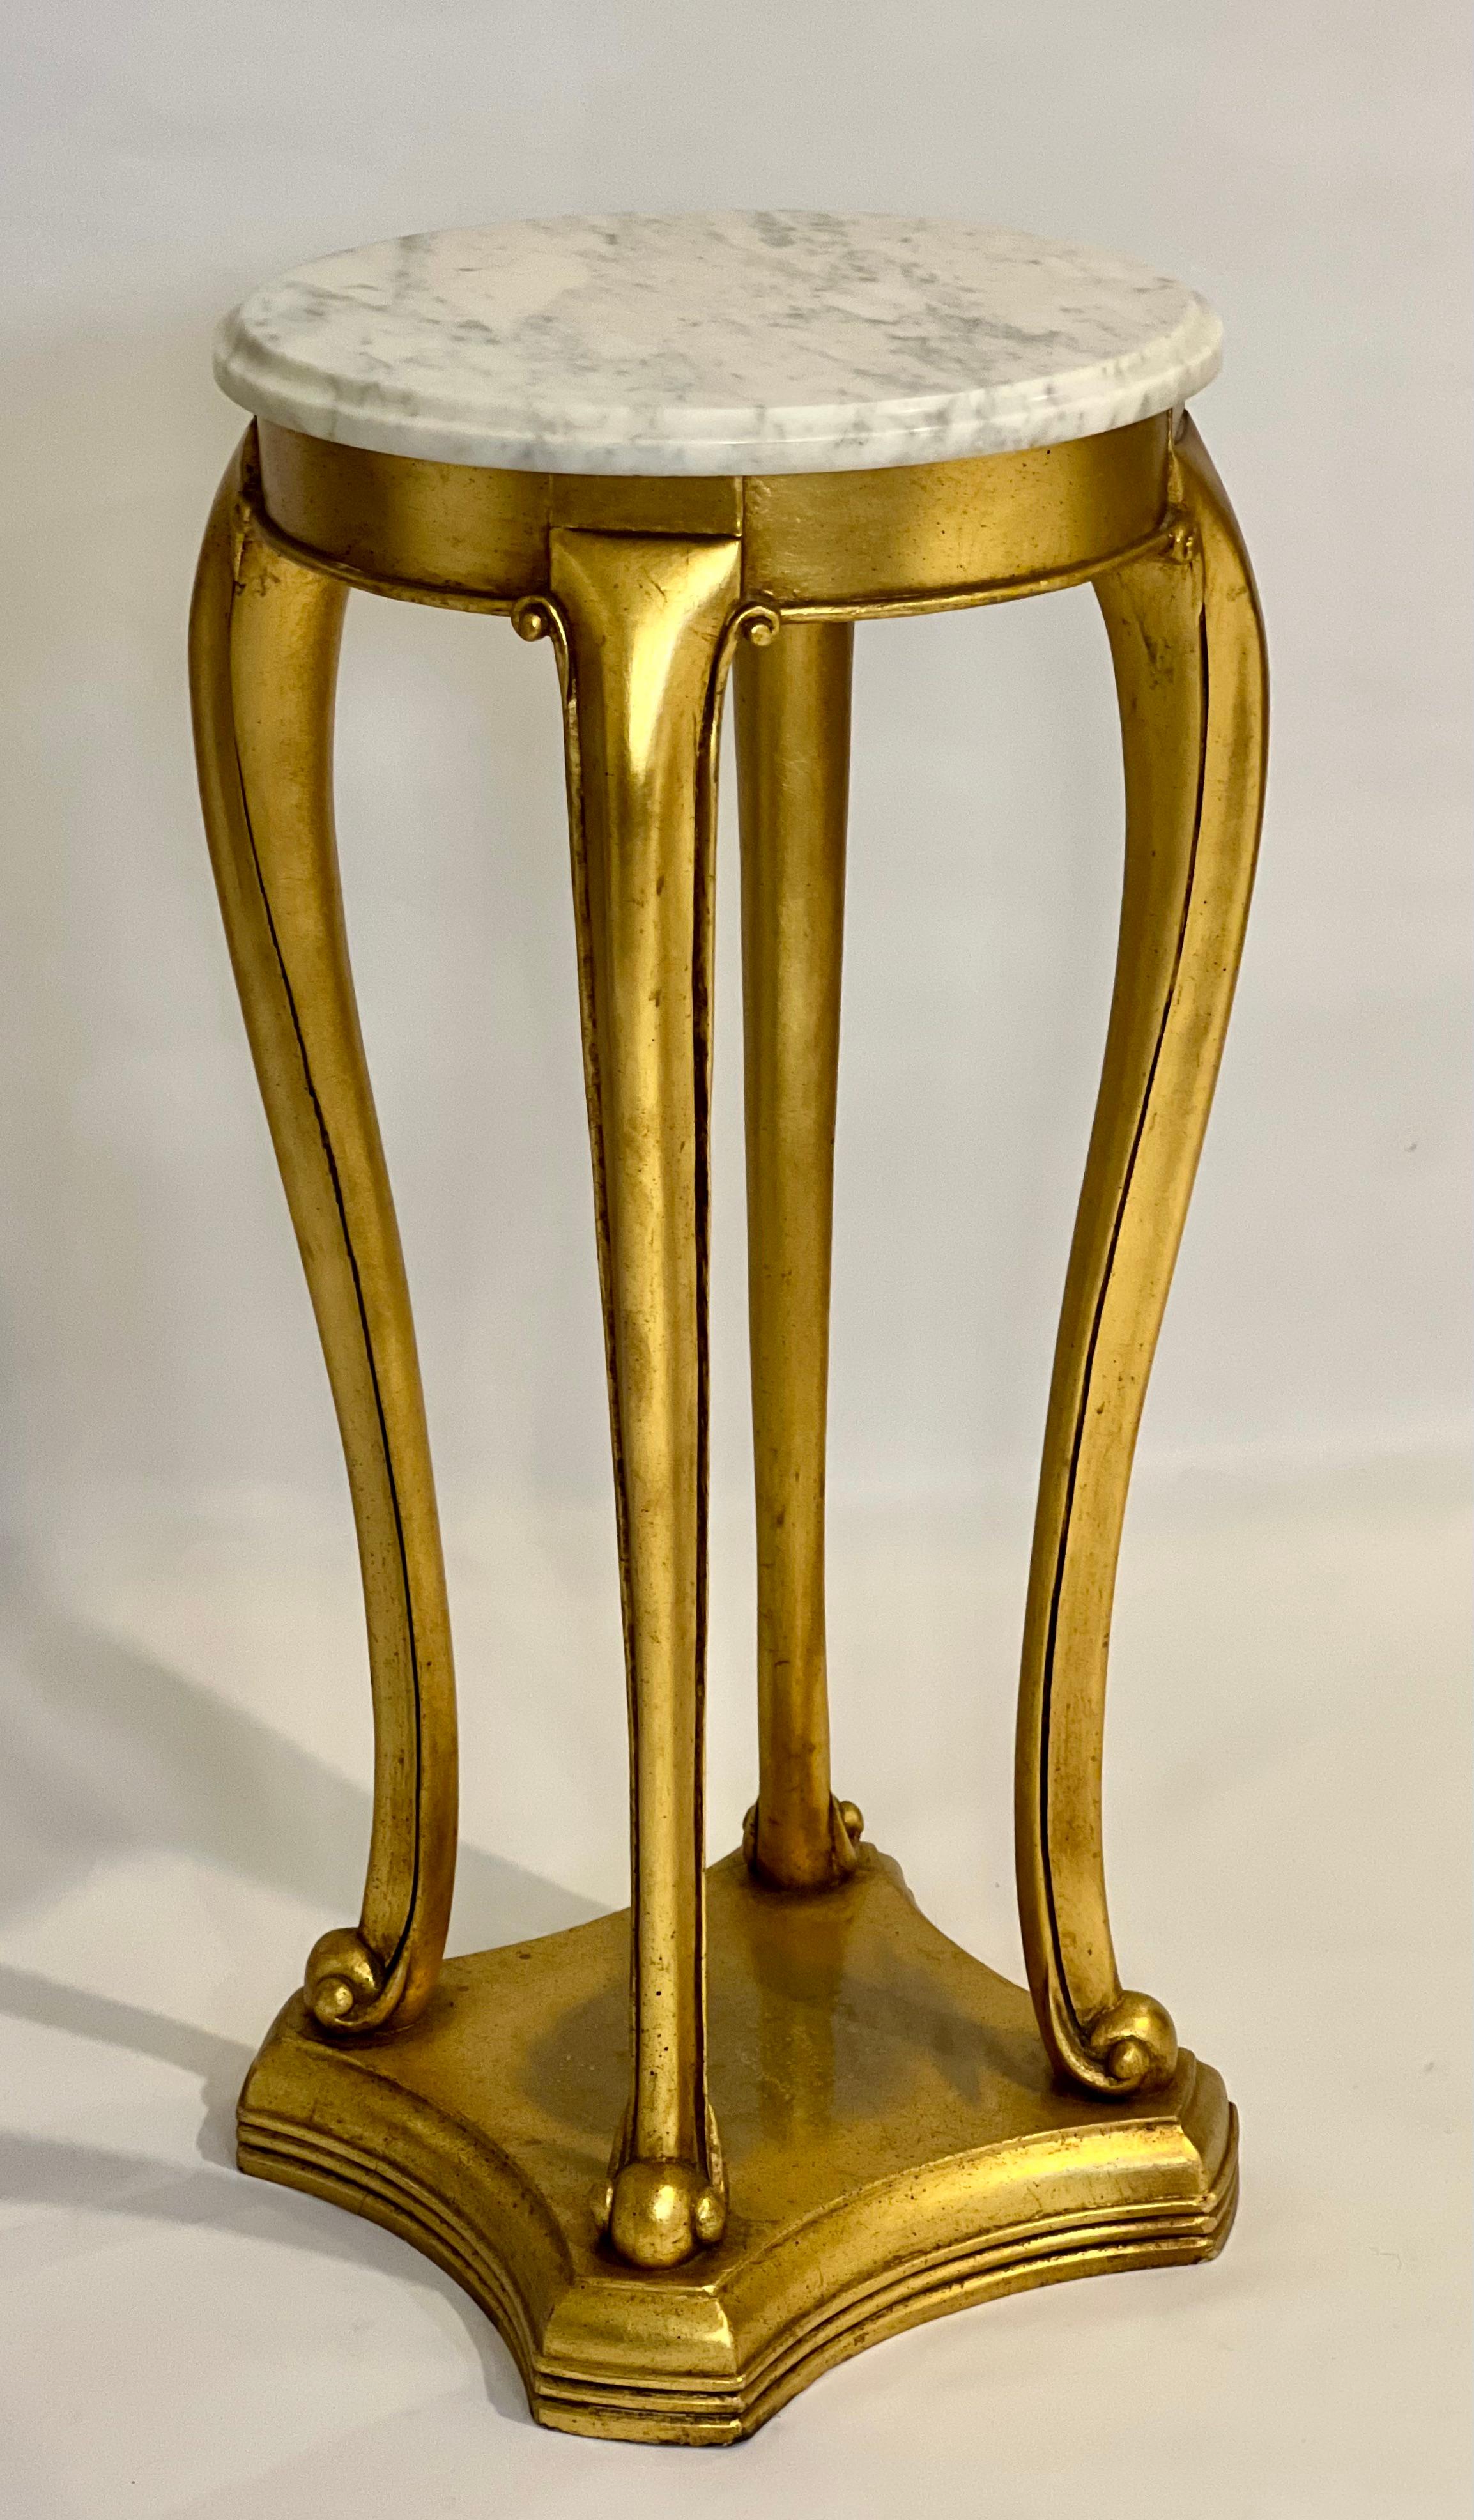 Antique Regency style gilt wood marble top pedestal or plant stand, c. late 19th century.

Fantastic gilt pedestal with cabriole legs and scrolled feet set upon an in-curving stepped base. Carved detail accentuates the base as well as the length of